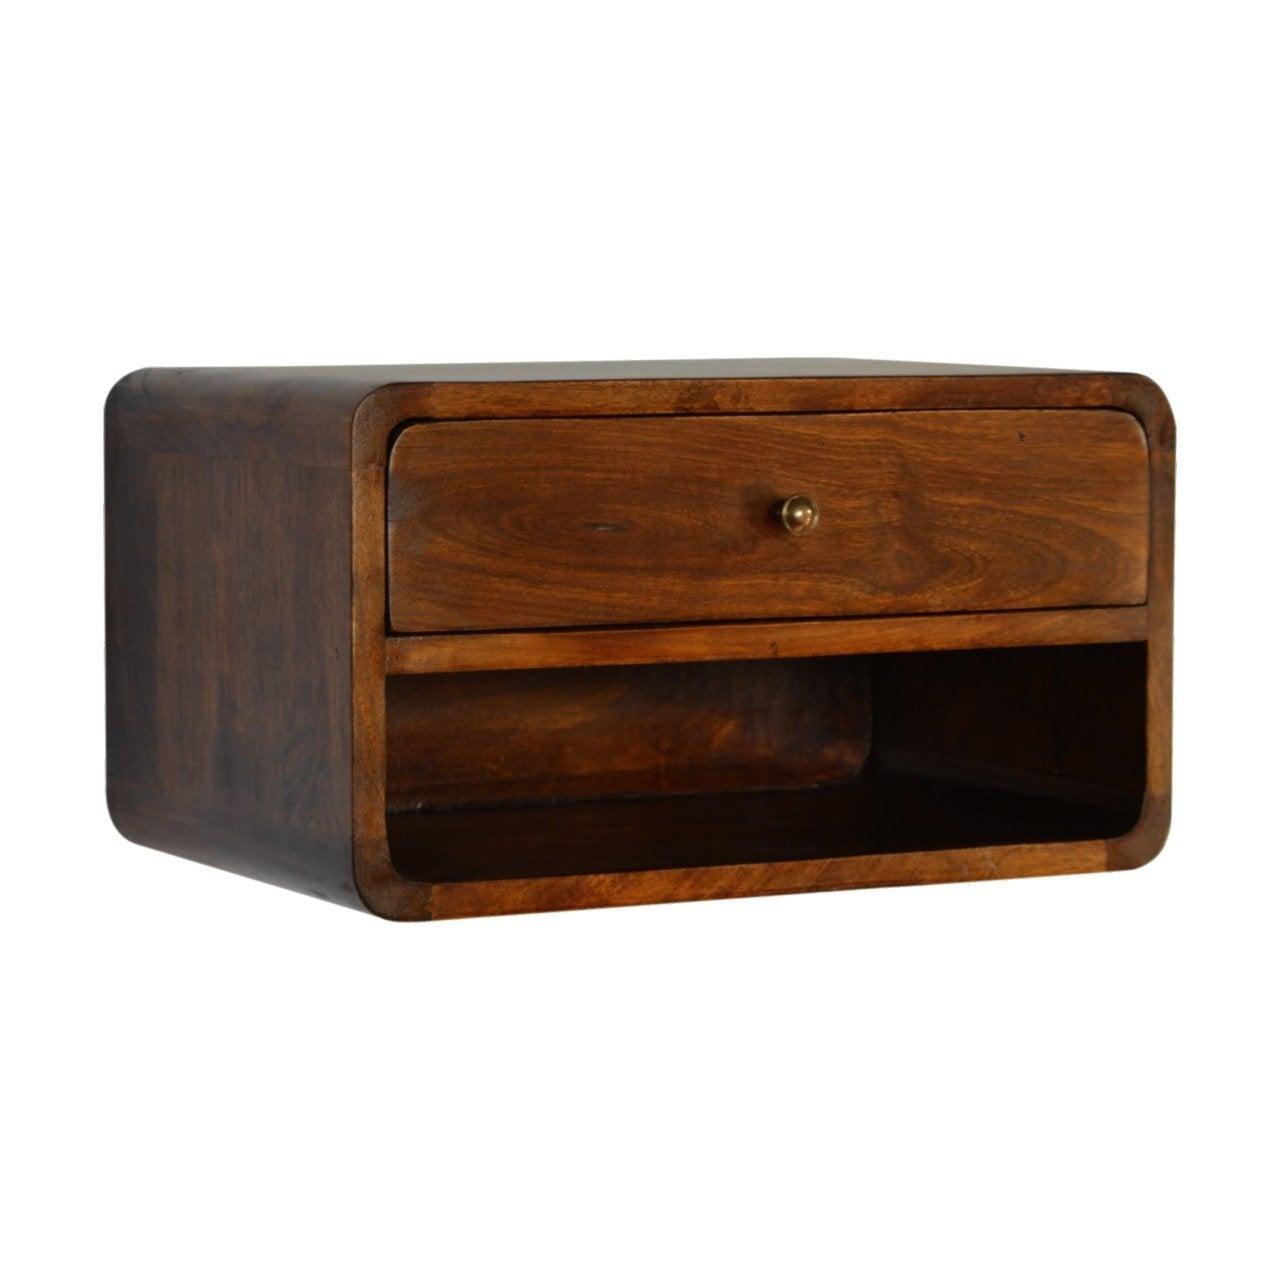 Curved chestnut wall mounted bedside table with open slot - crimblefest furniture - image 3